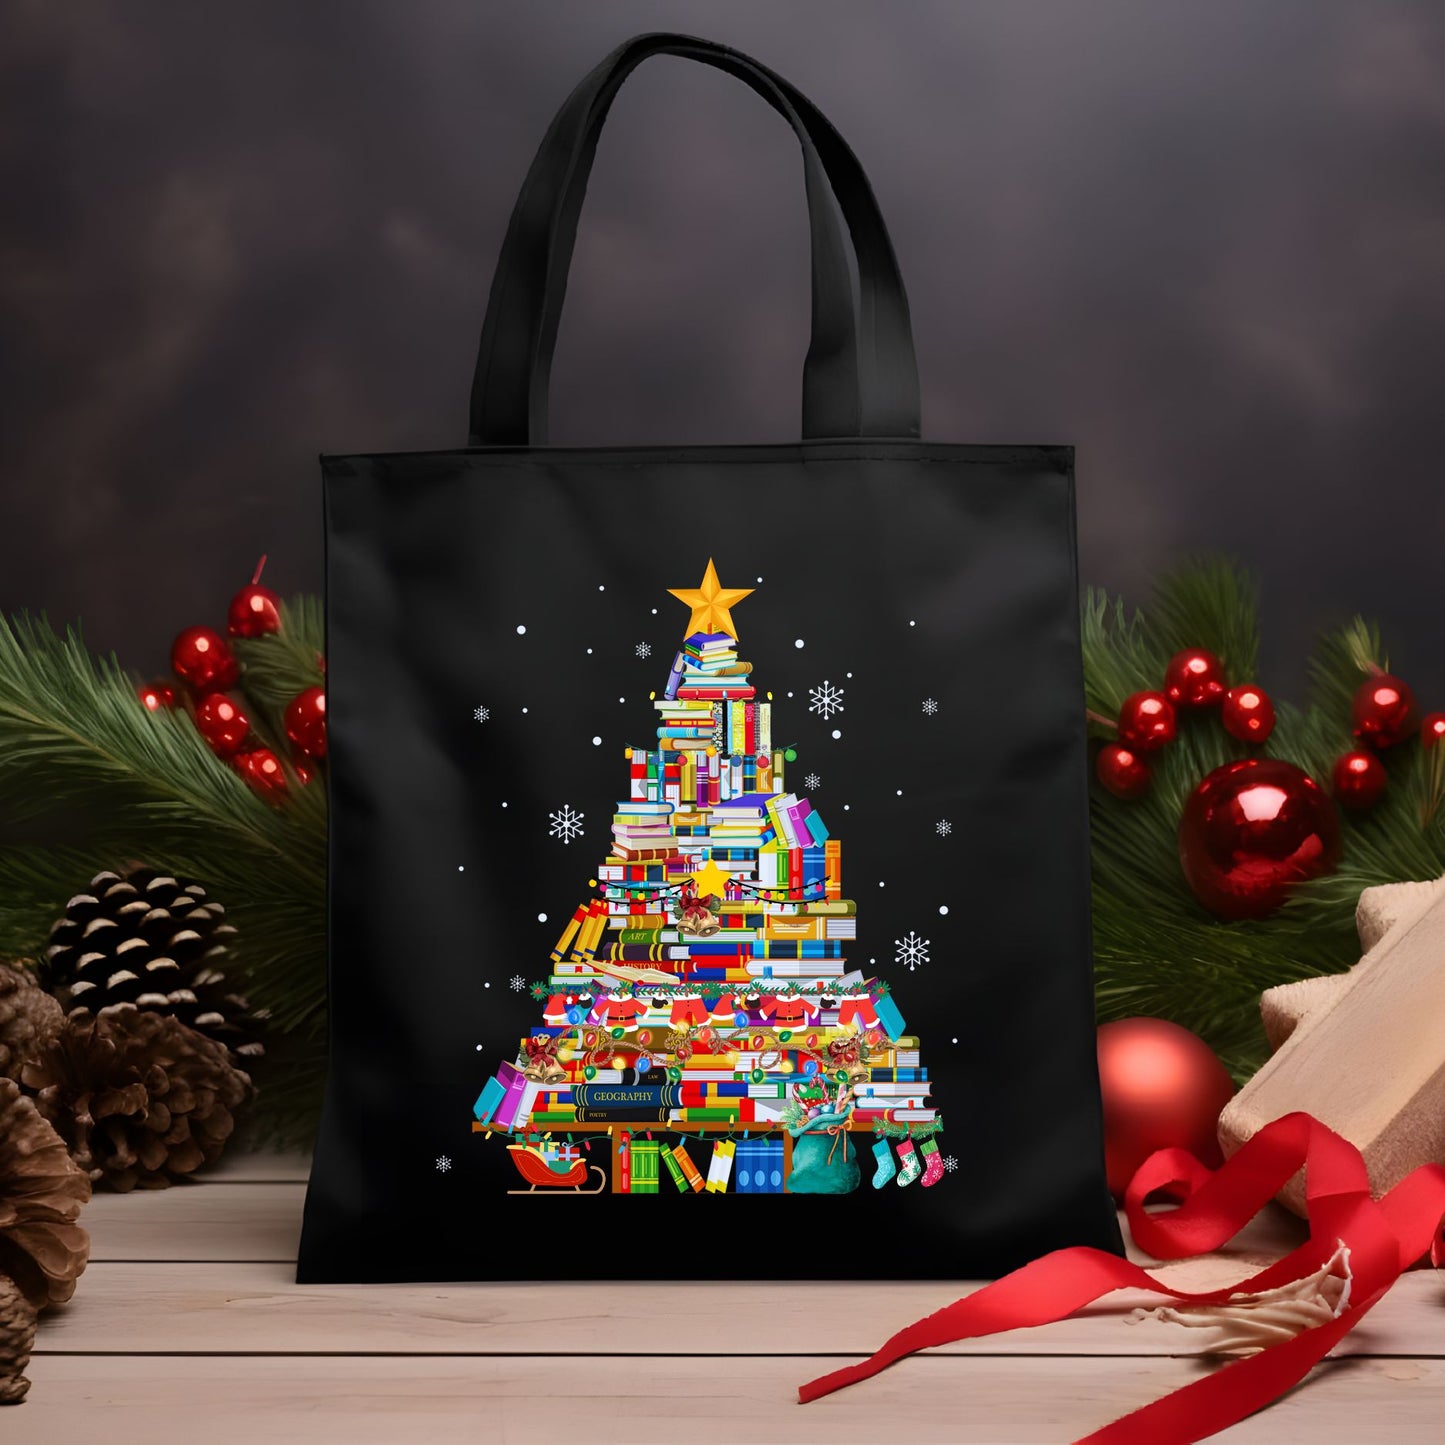 Christmas Tote Bag | Librarian and Teacher Holiday Gift | Festive Carryall with Christmas Book Tree Design Bags   